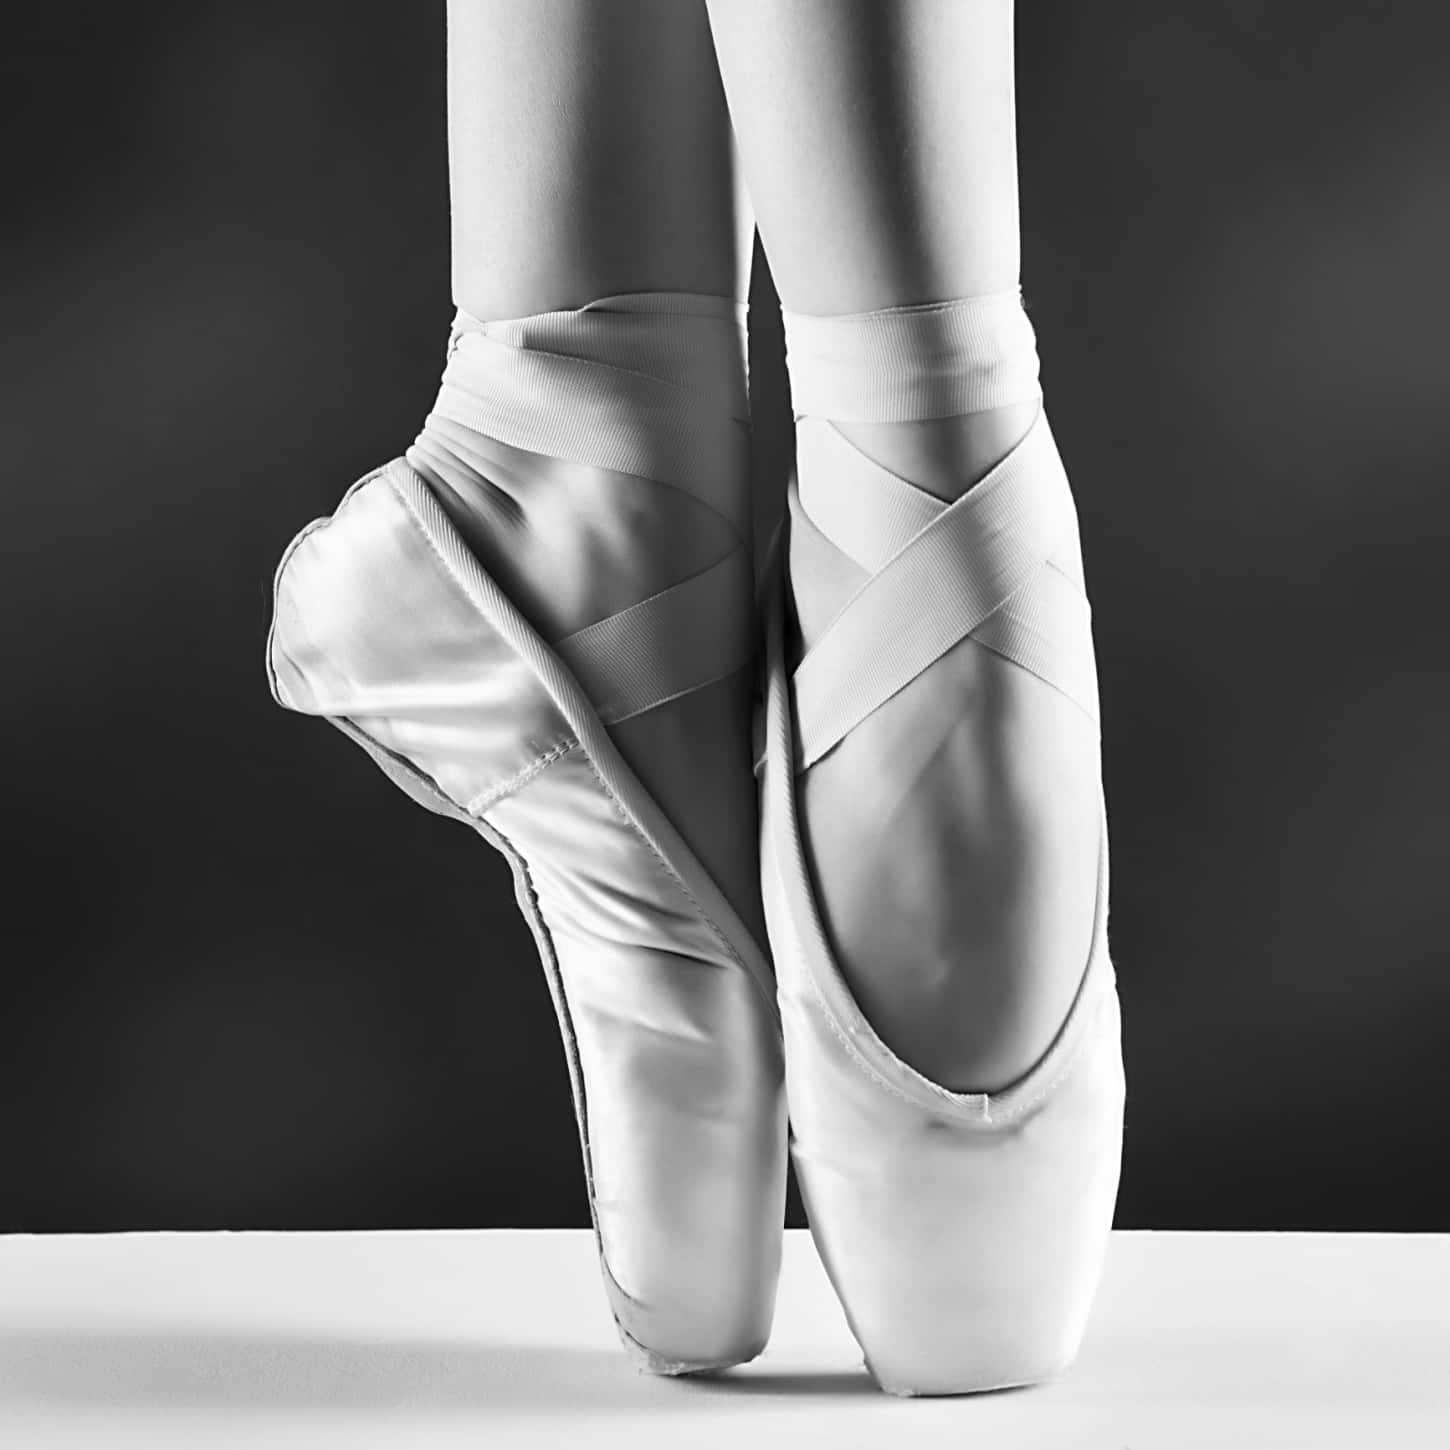 Monochrome Elegance Of Pointe Ballet Shoes Background